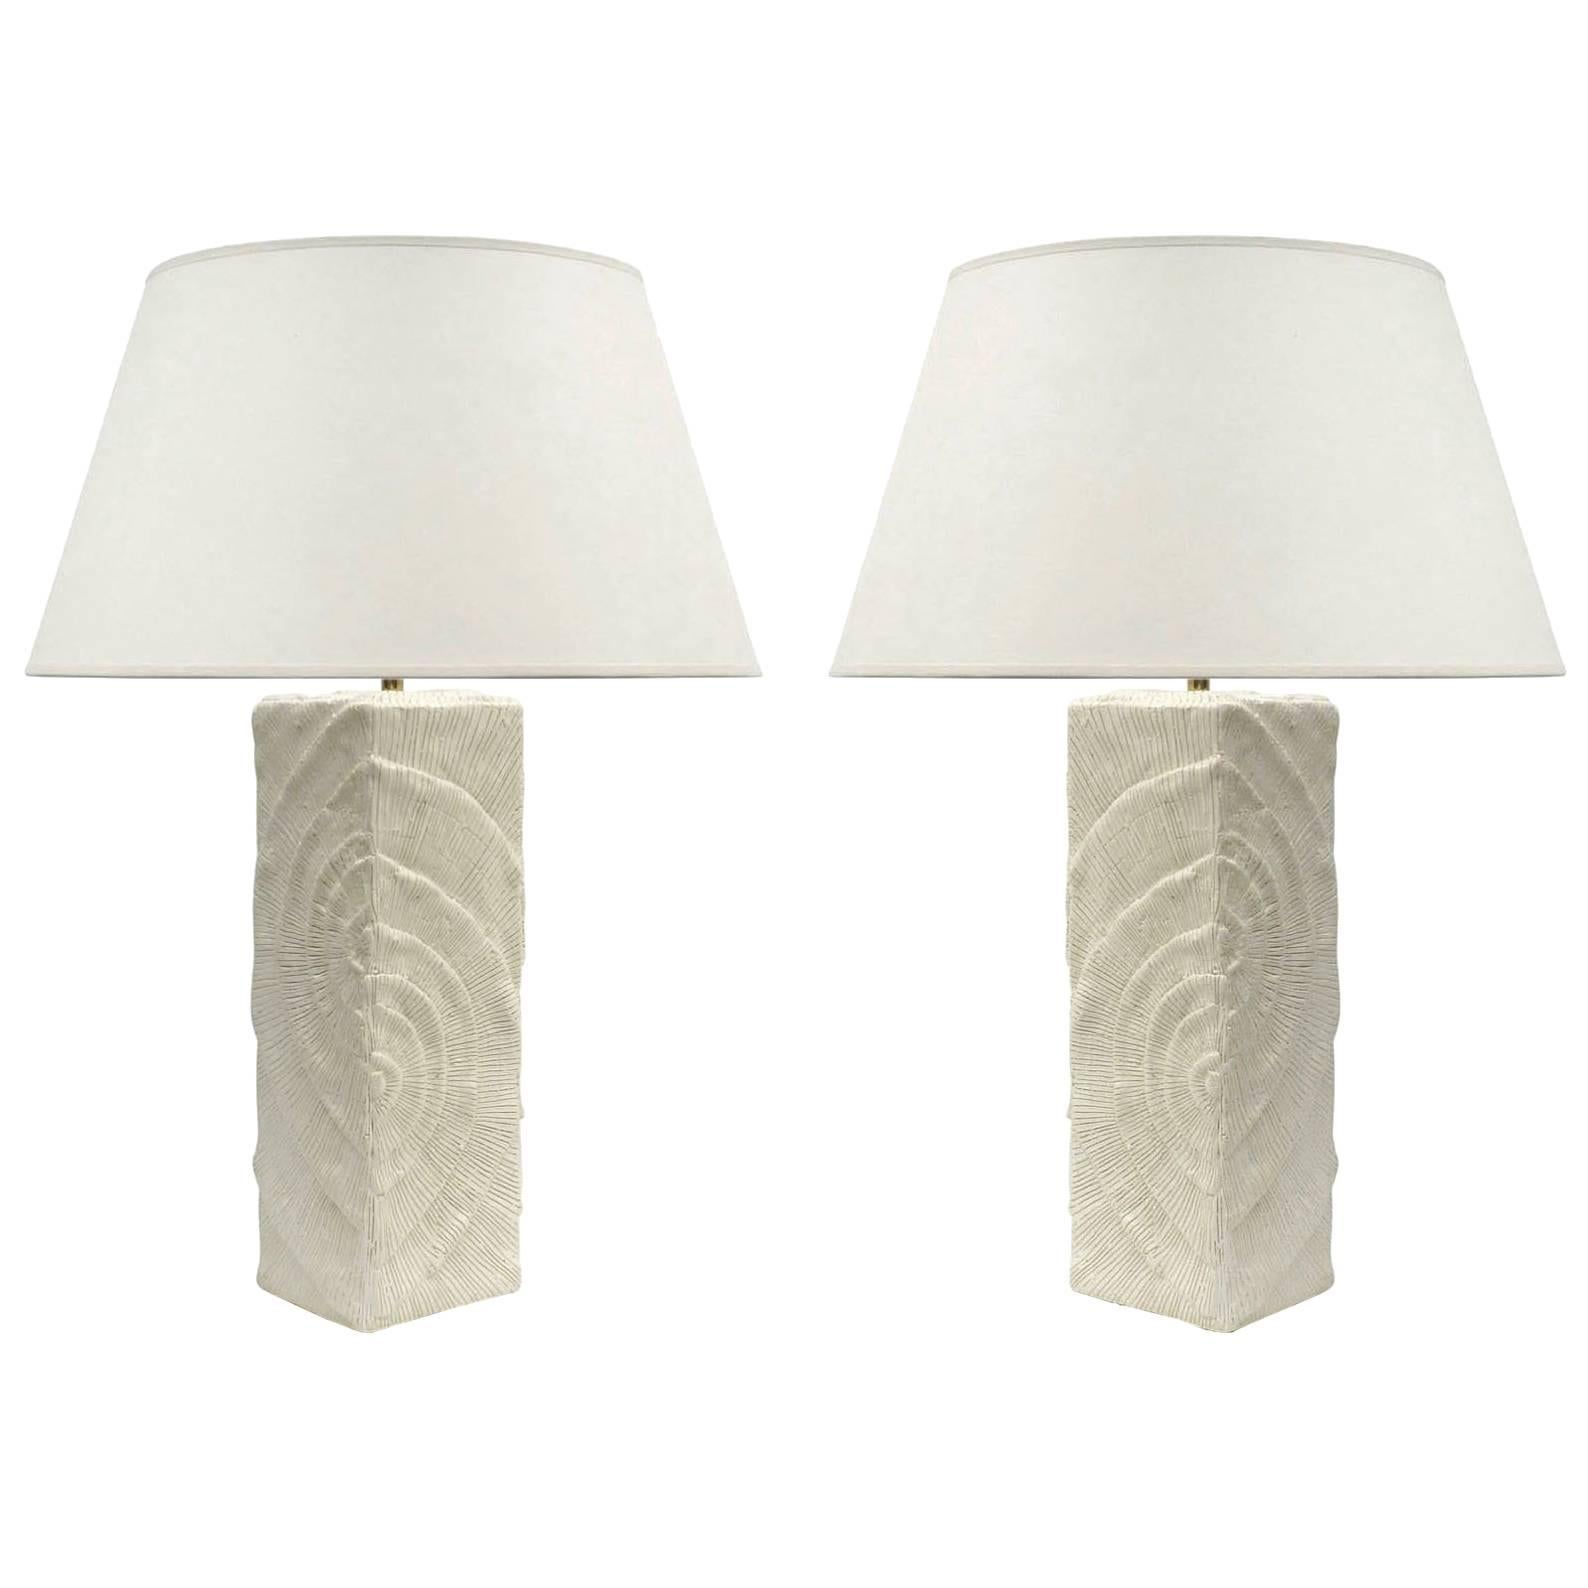 Pair of Modern Plaster Table Lamps with a Carved Spiral Pattern, France